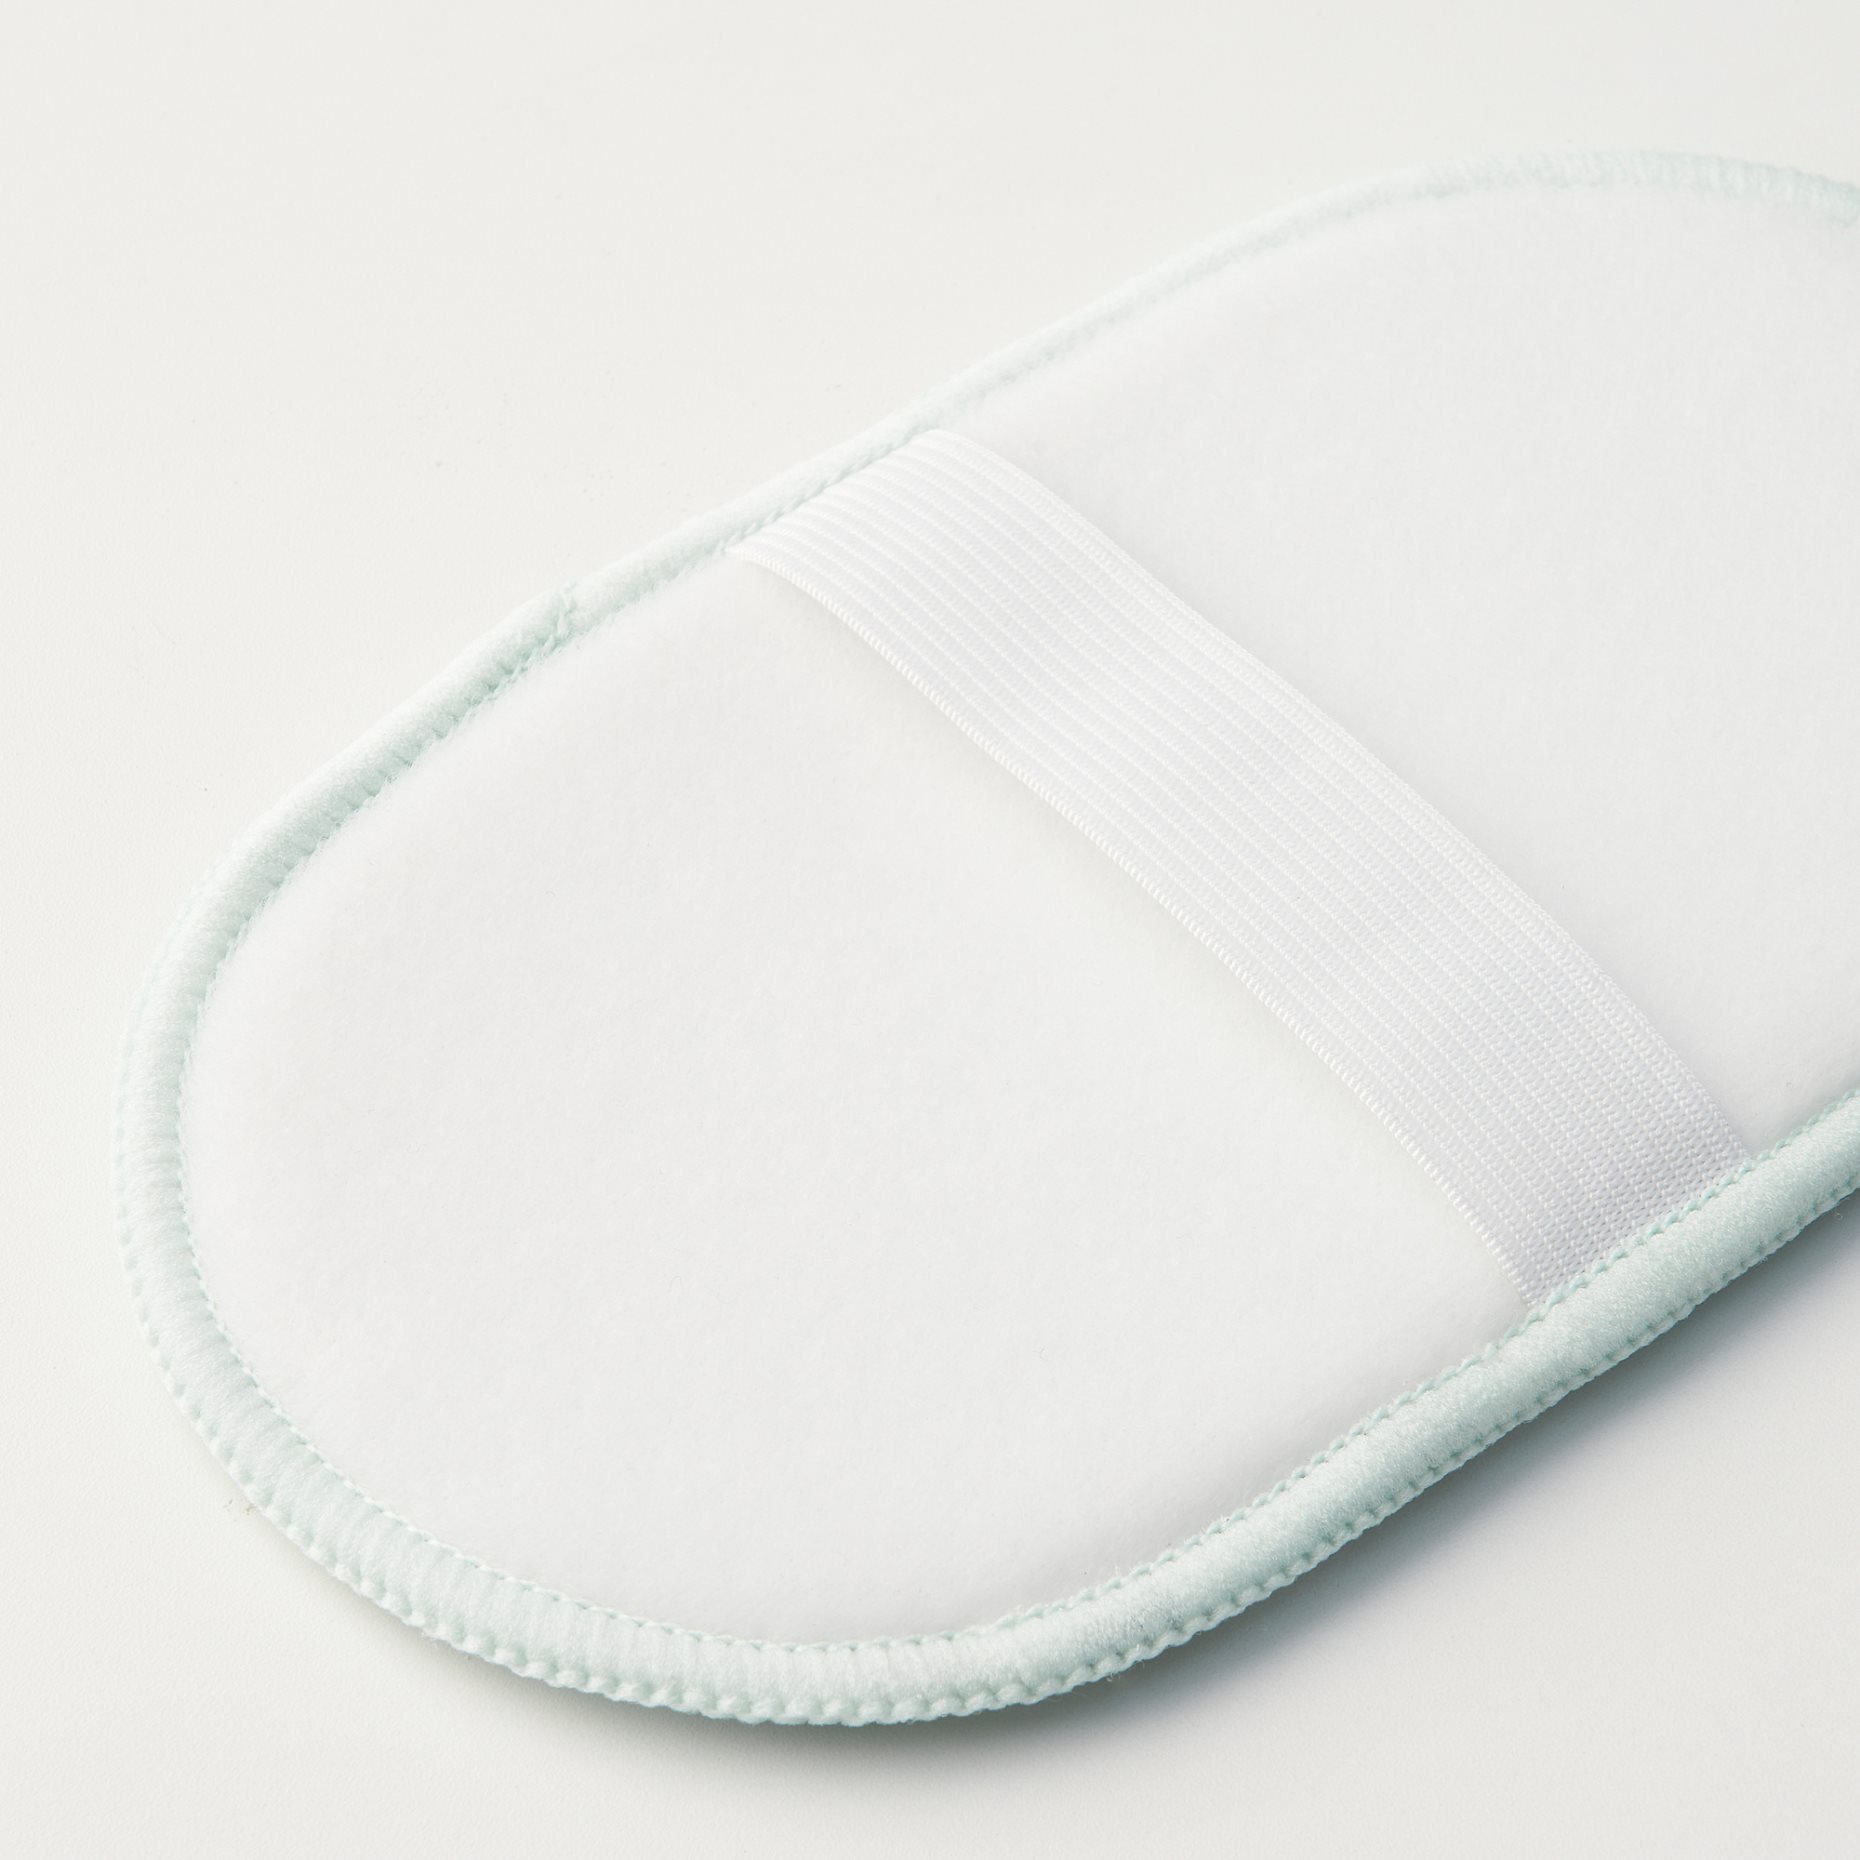 PEPPRIG, microfibre cleaning pad, 605.676.41